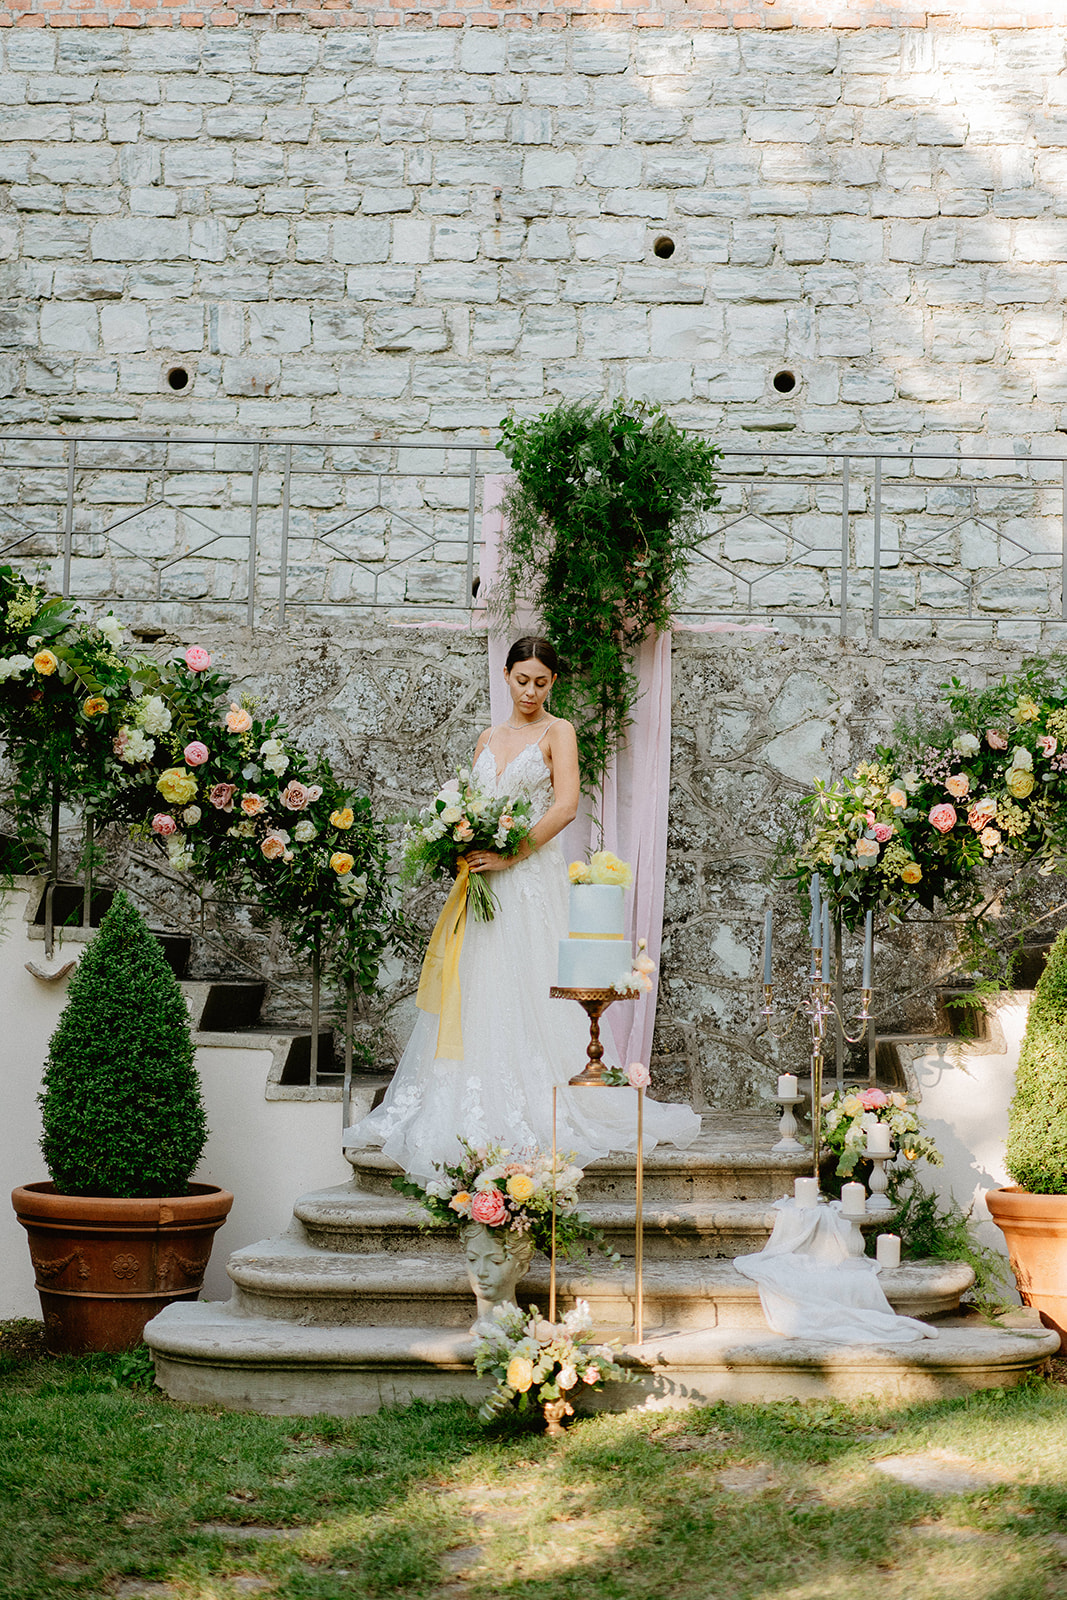 Styled Shoot, Fabriano – Wedding Angels